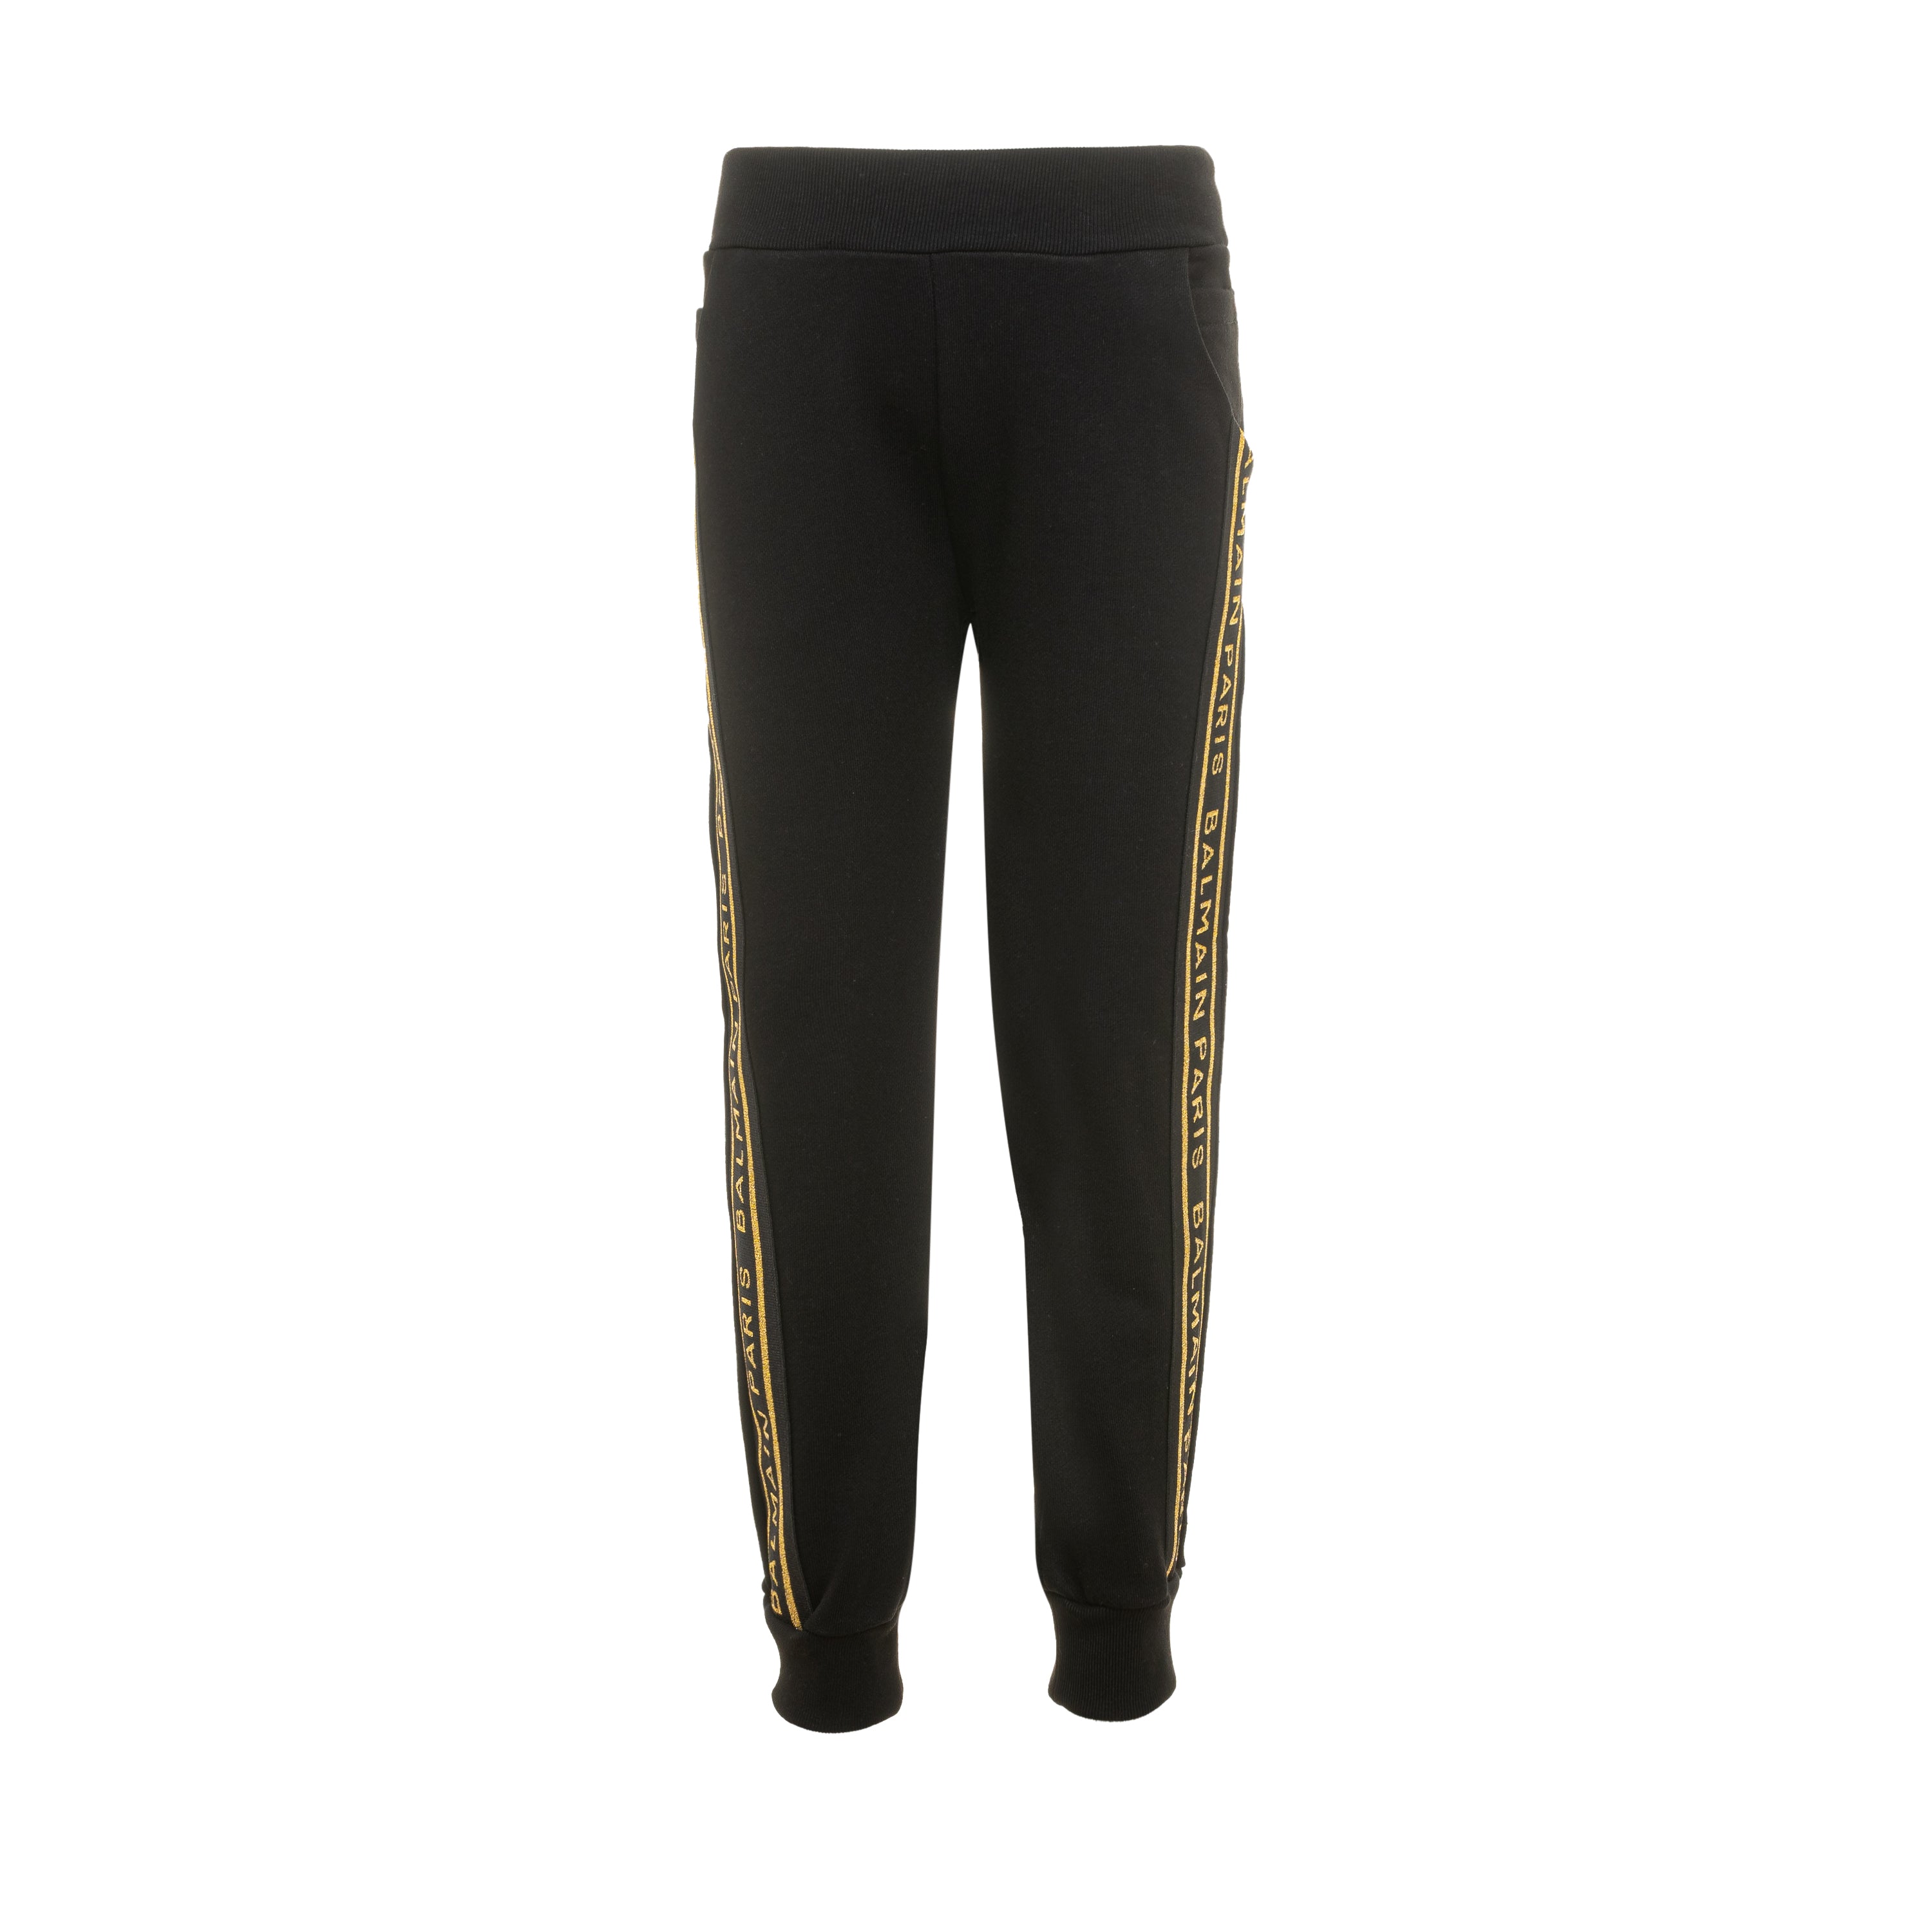 Black & Gold Jogging Trousers – LM Bambini